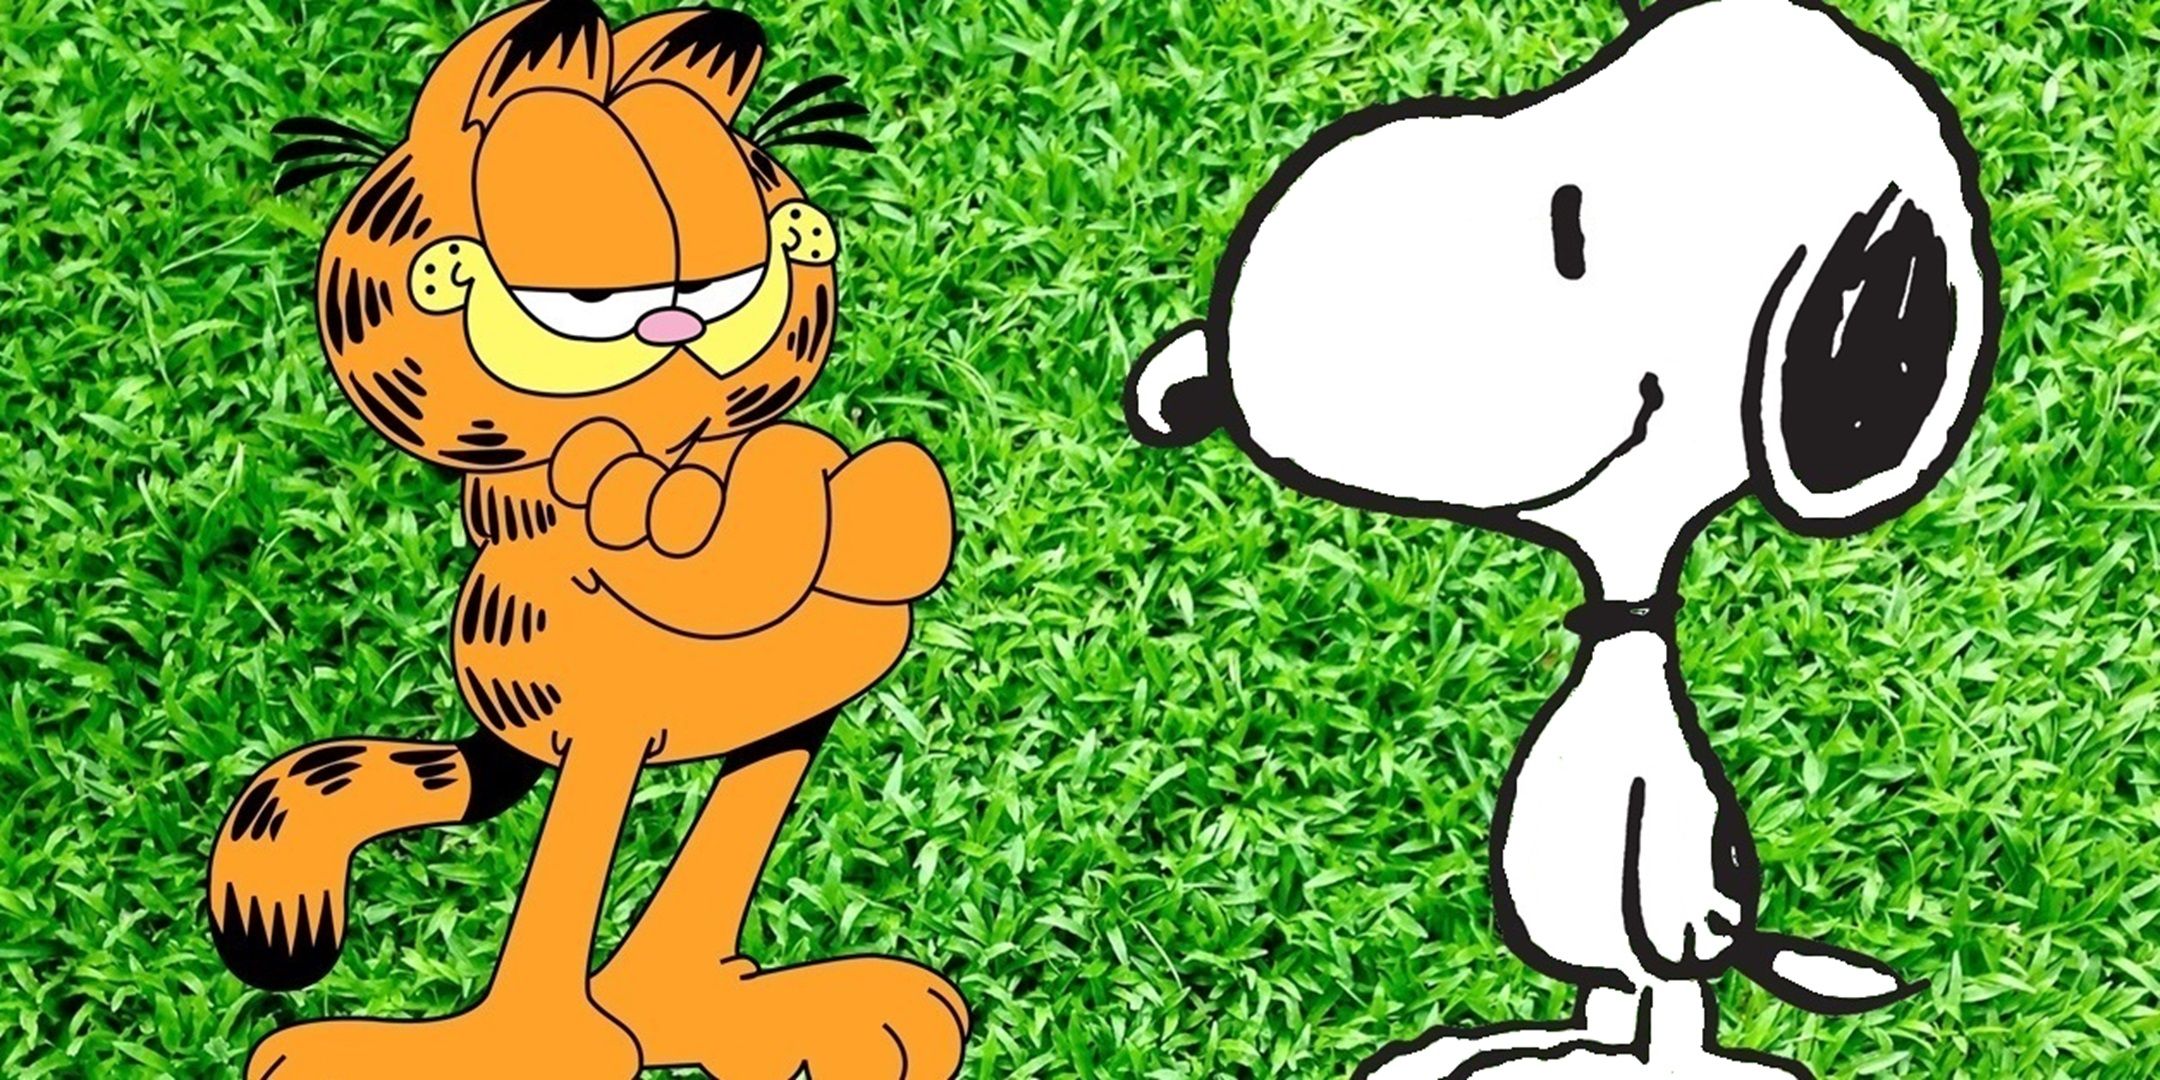 Garfield and Snoopy behind a field gross